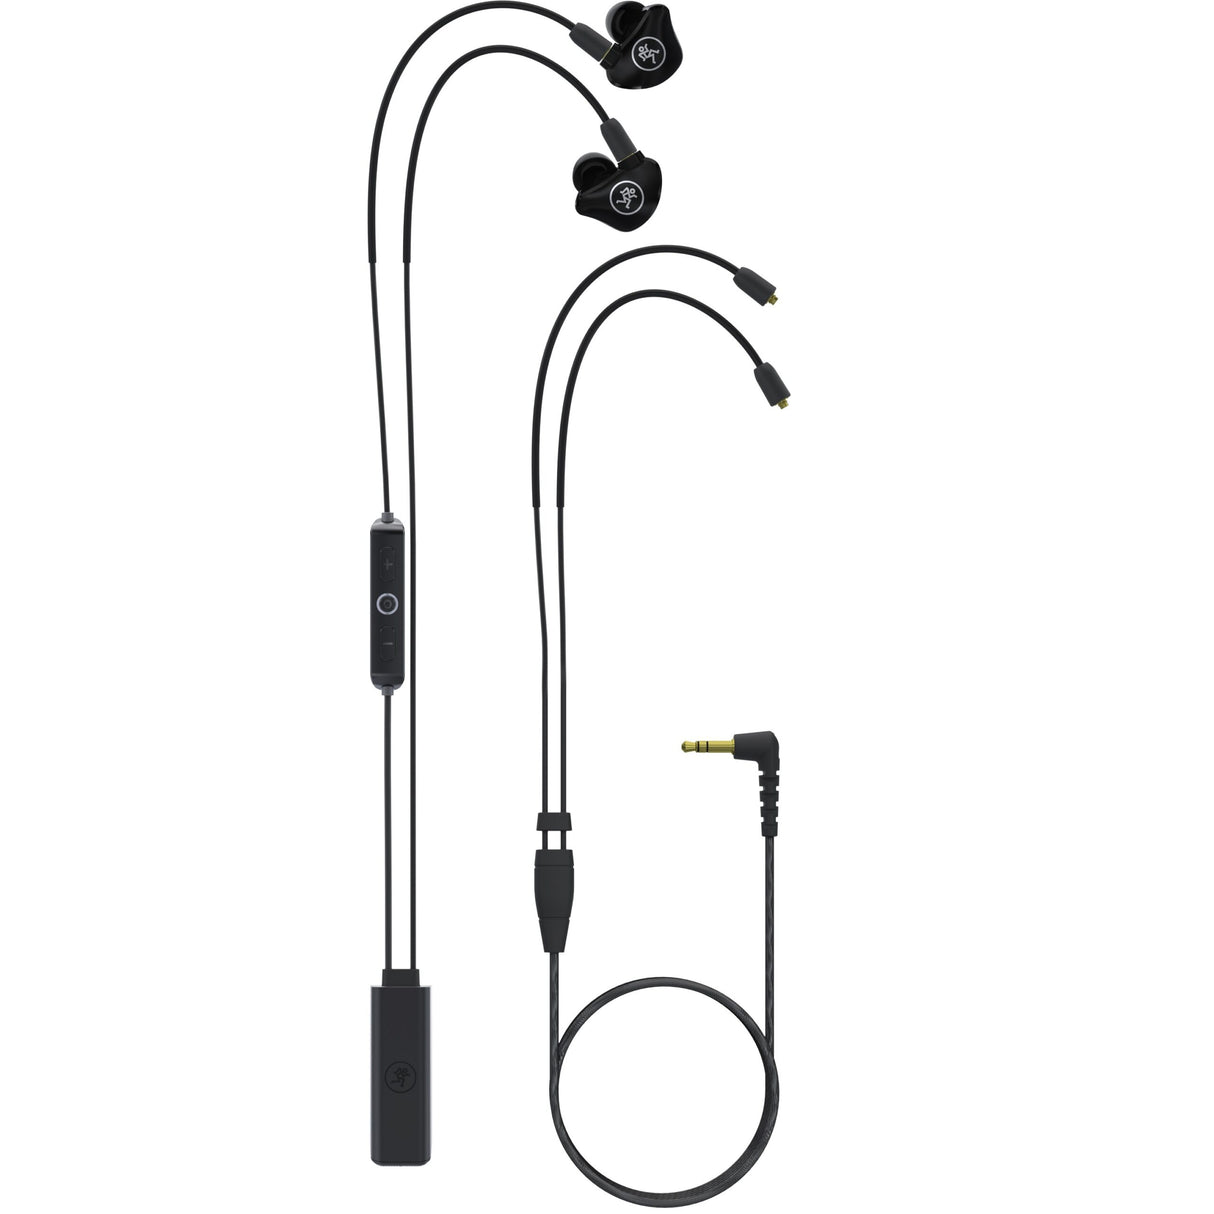 Mackie MP-220 BTA Dual Dynamic Driver Professional In-Ear Monitors with Bluetooth Adapter